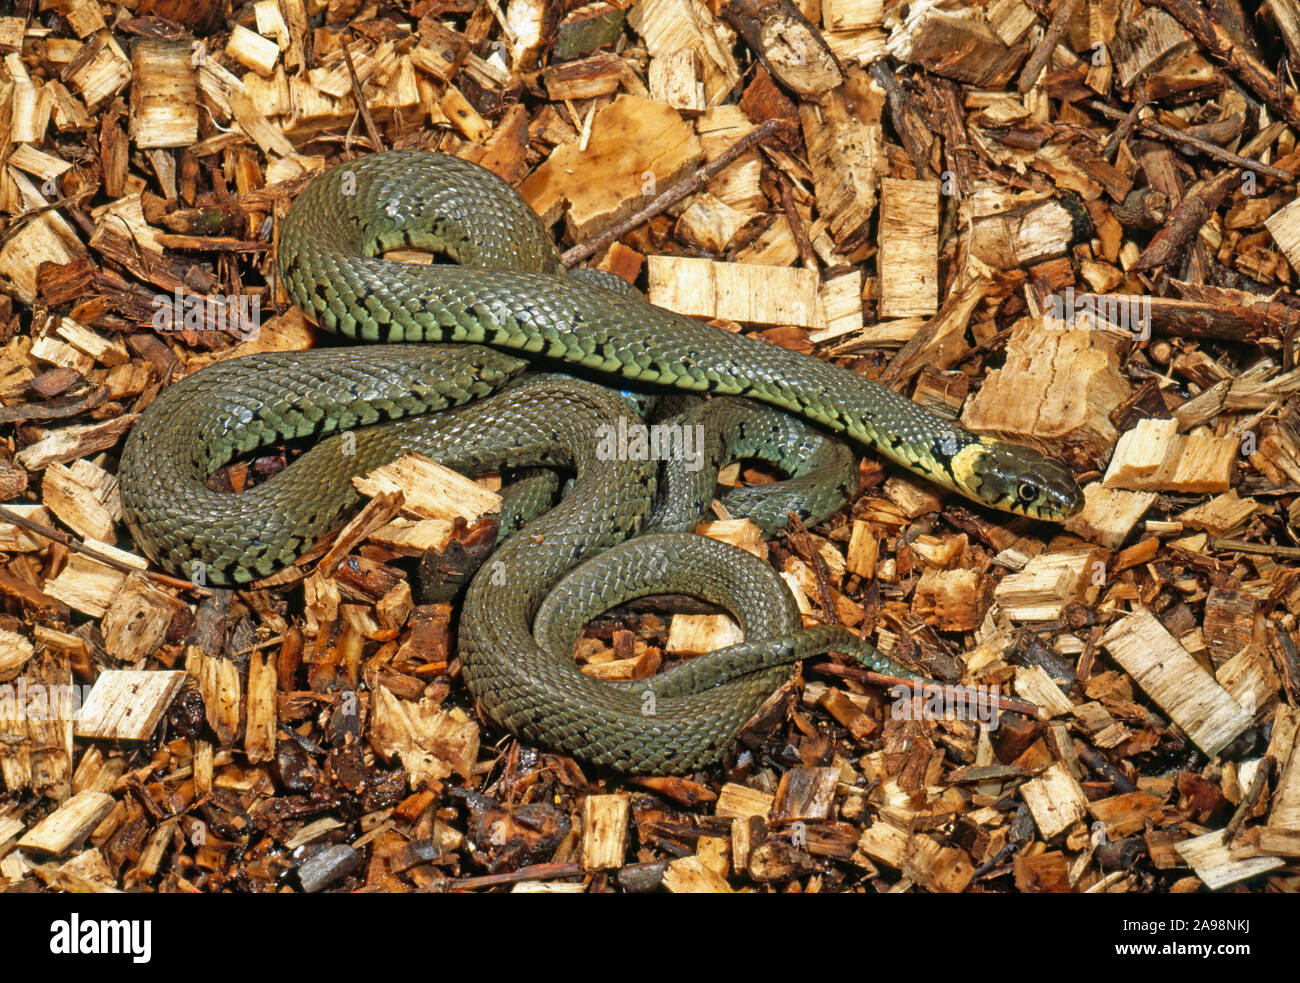 GRASS SNAKE on a woodchip pile (Natrix natrix helvetica),  in timber yard.  Decomposing mound warmth enabling snake to thermoregulate earlier in day. Stock Photo